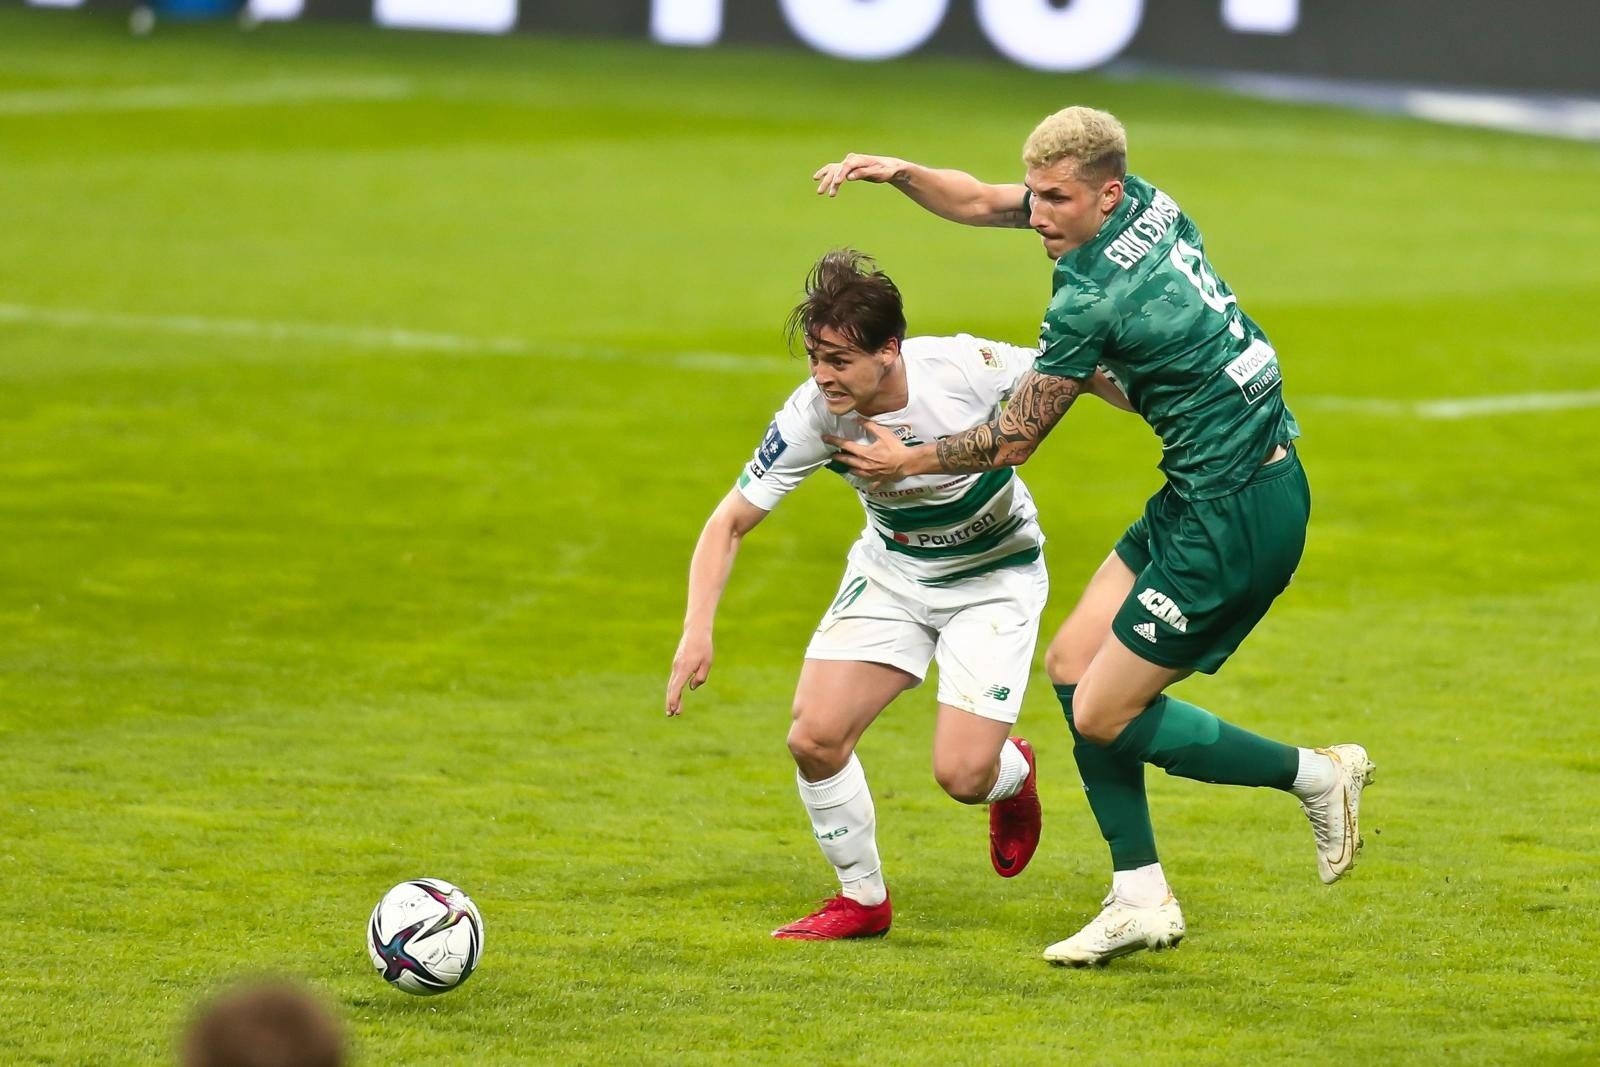 Ląsk Wrocław - Lechia Gdańsk 10/04/2021 White and greens are not satisfied after the draw, Tomas Magovsky with a premiere goal [zdjęcia]

